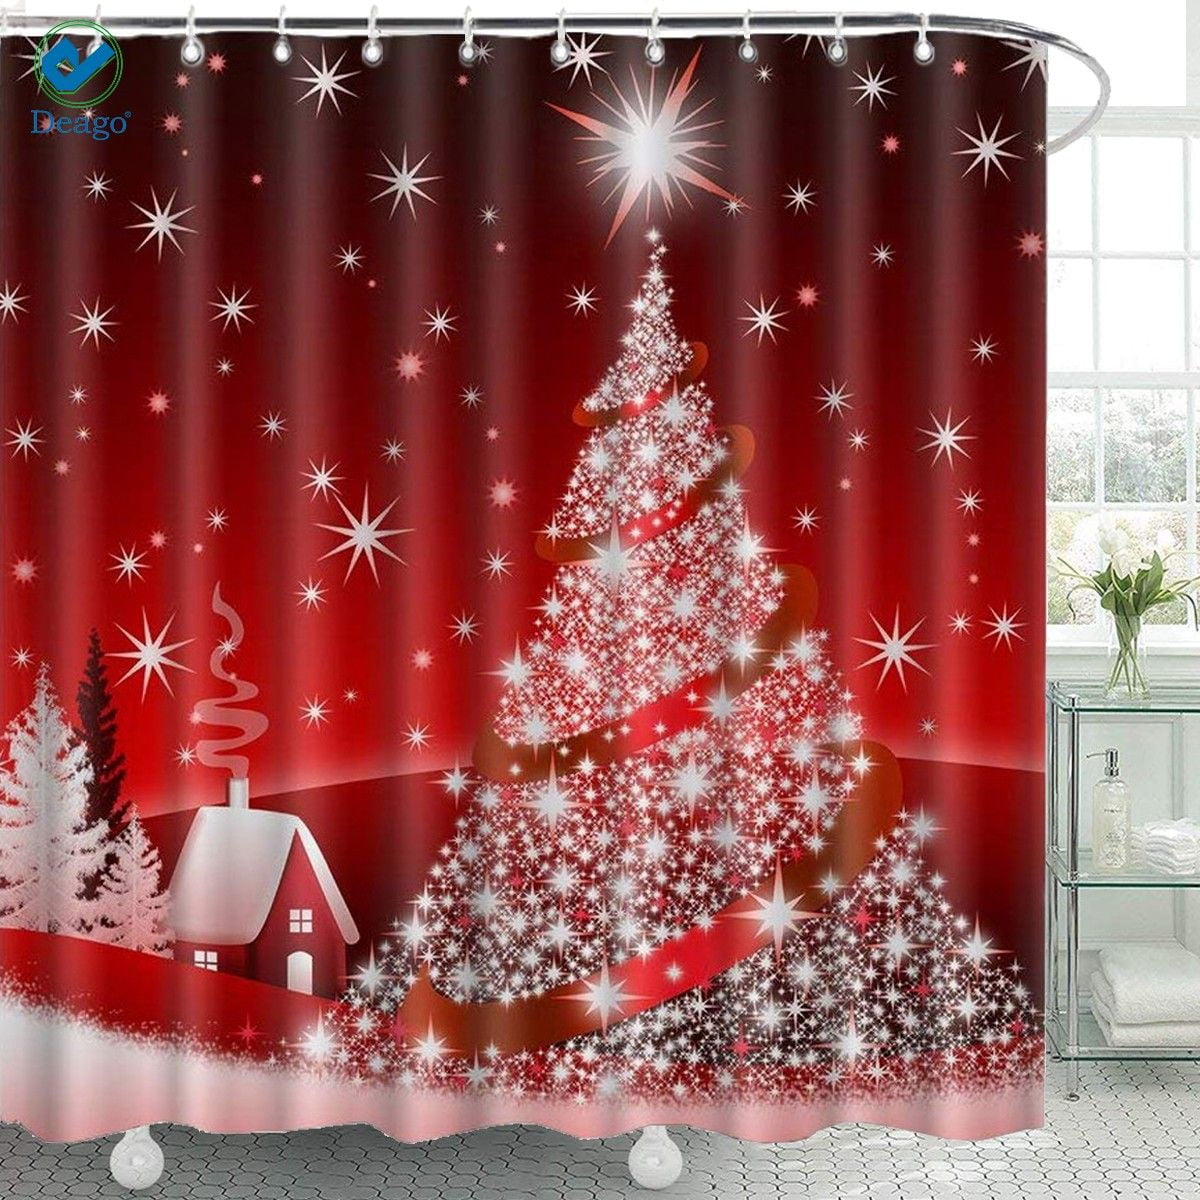 Christmas tree and red truck Shower Curtain Bathroom Decor Fabric & 12hooks 71" 